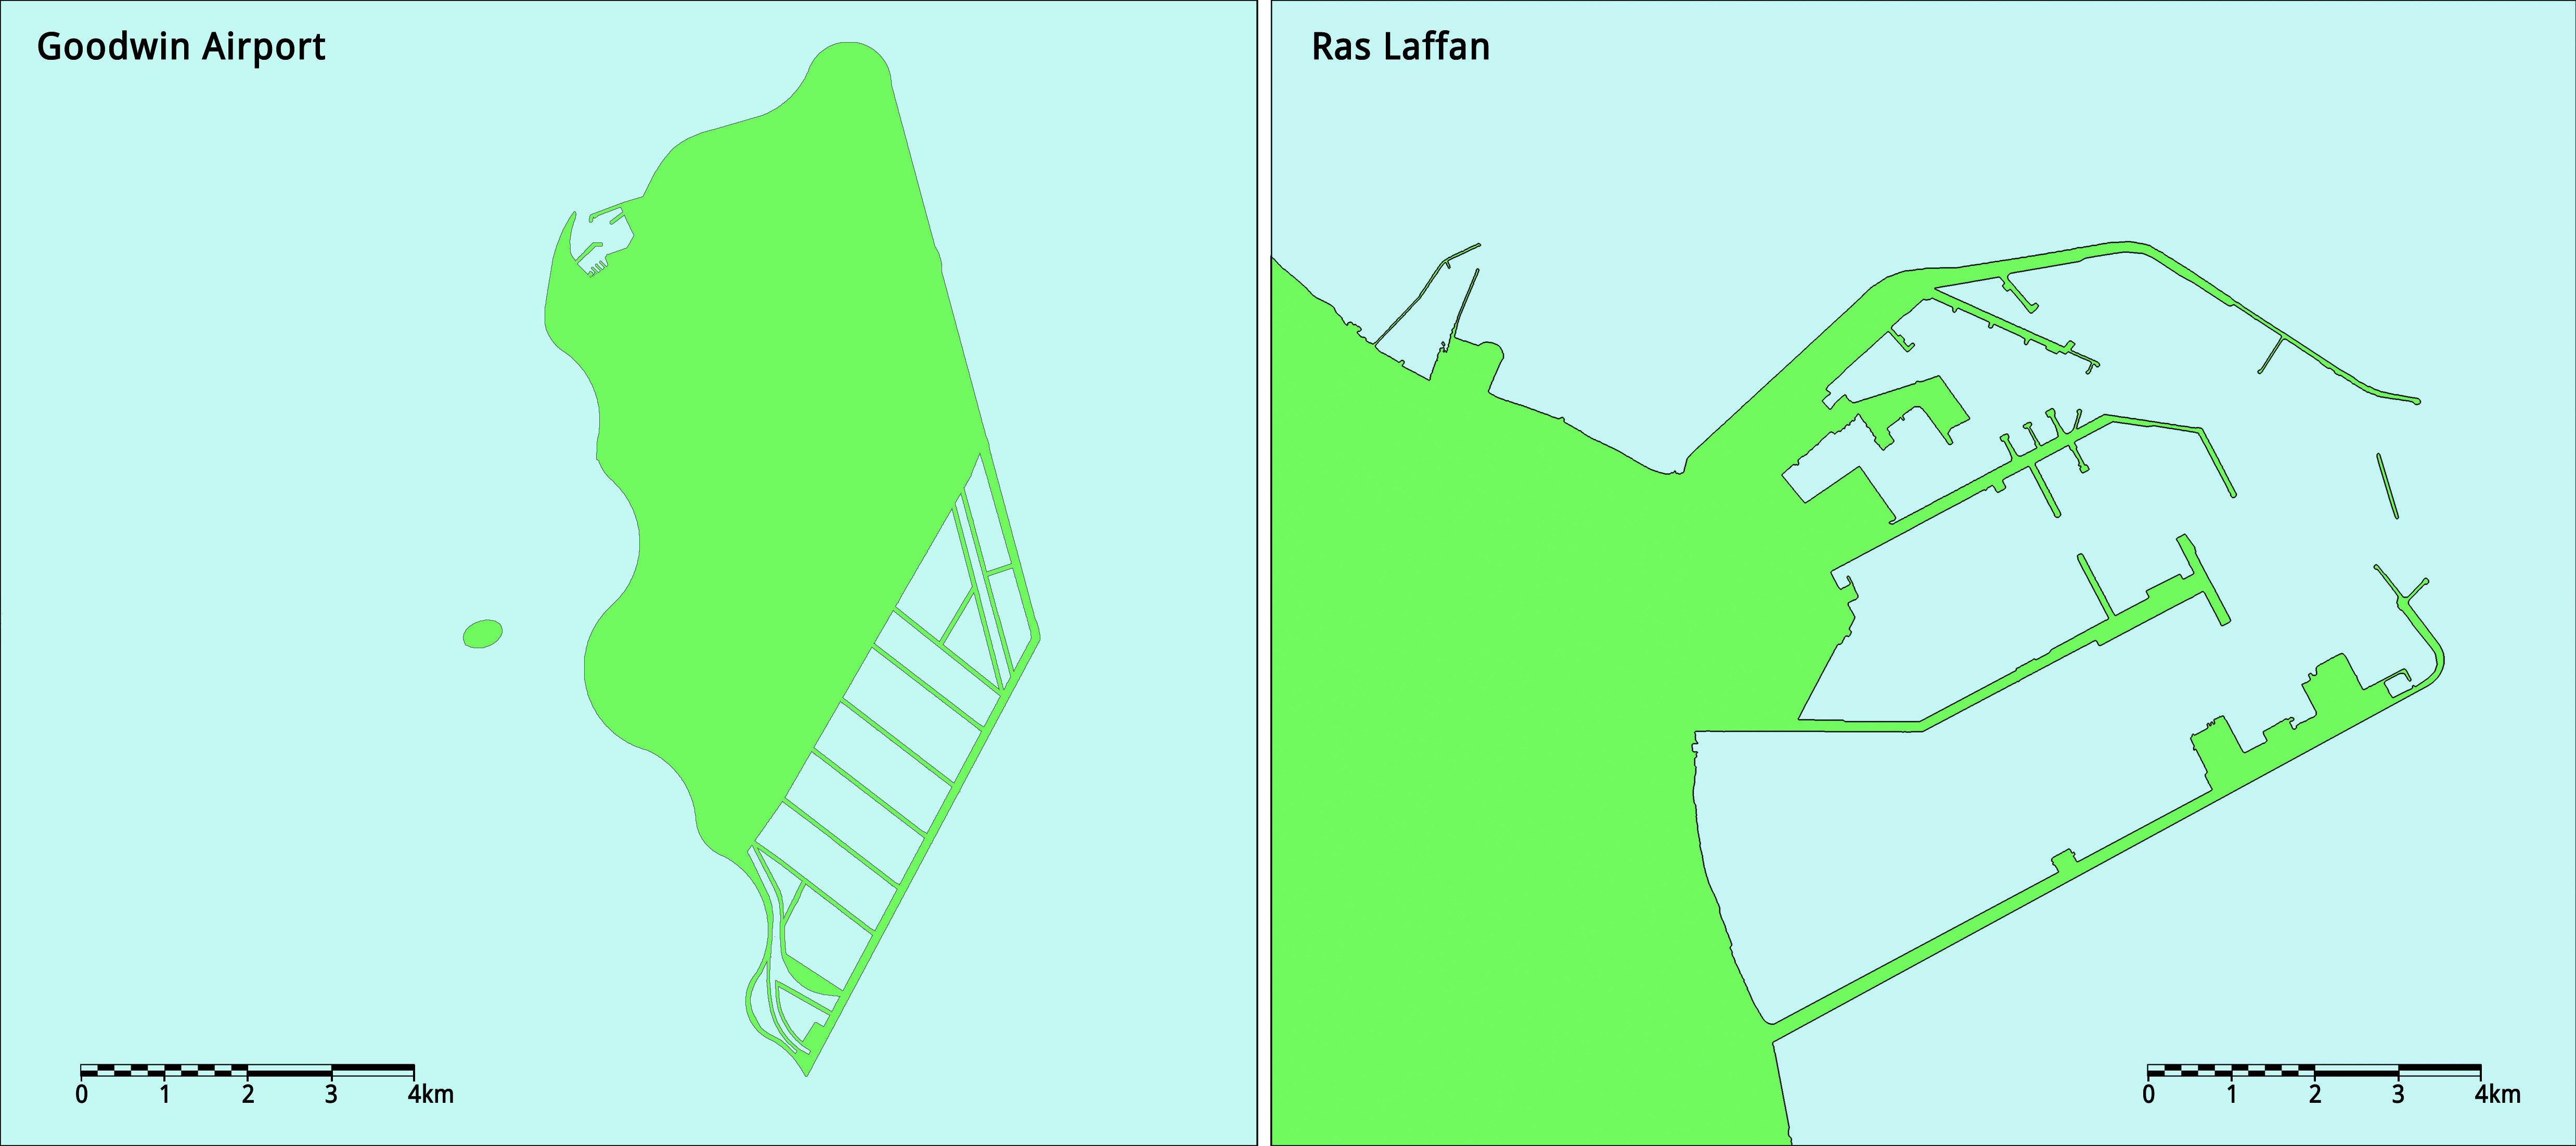 Goodwin Airport Island and Ras Laffan to the same scale